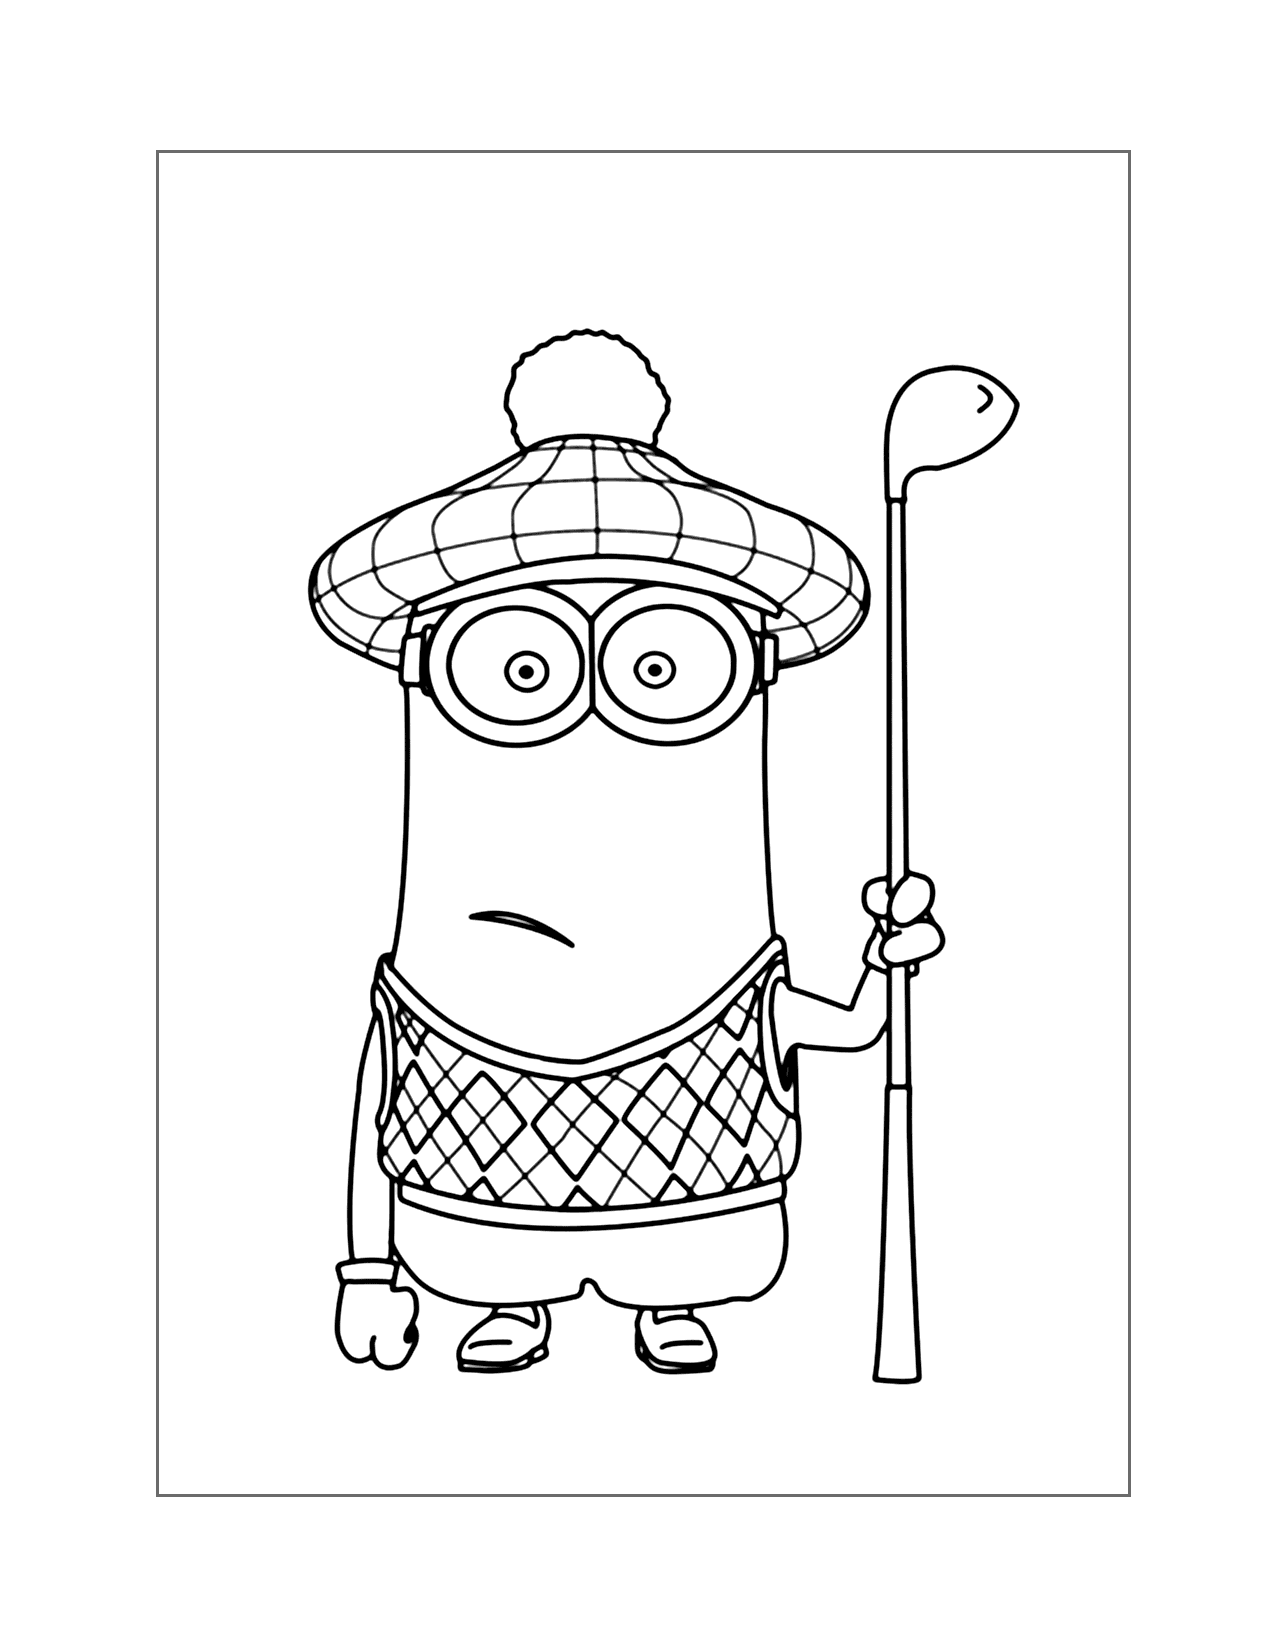 Golf Minion Coloring Page